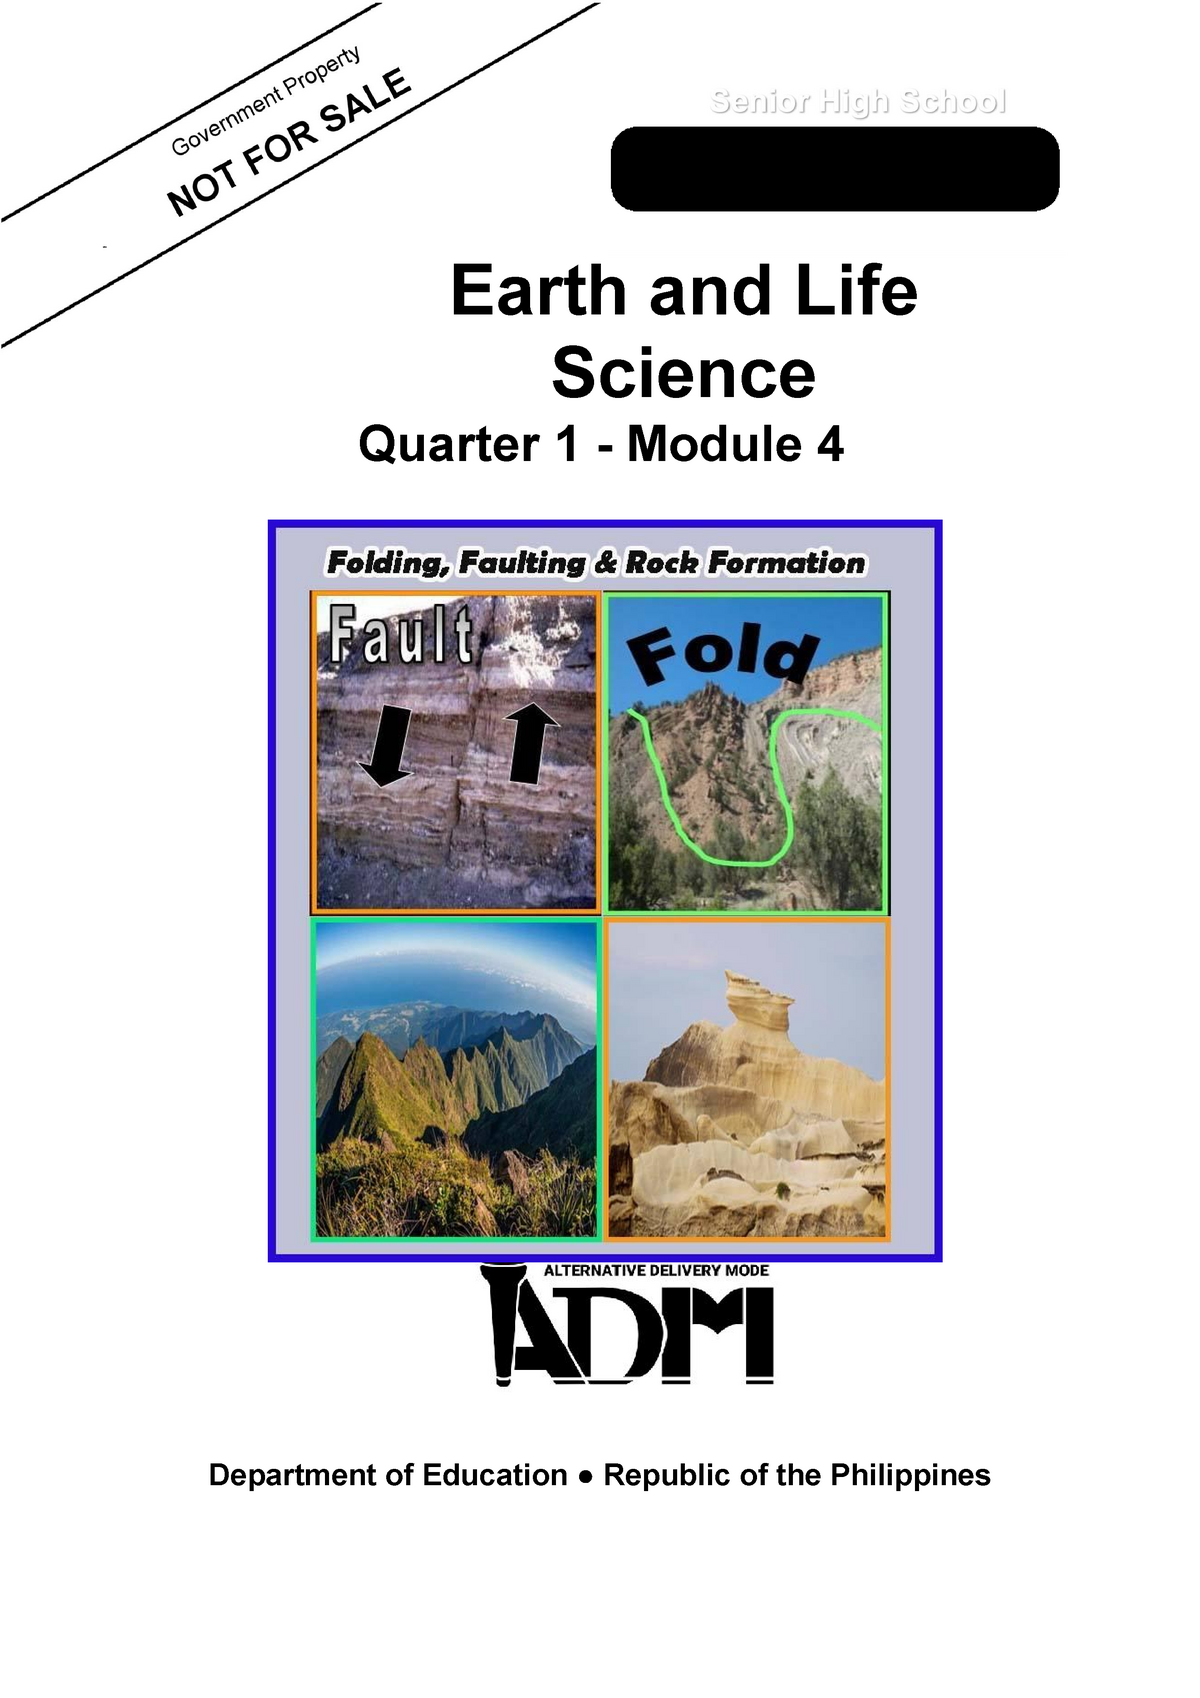 Earth And Life Science Quarter 1 Module 4 Not Earth And Life Science Quarter 1 Module 4 4561